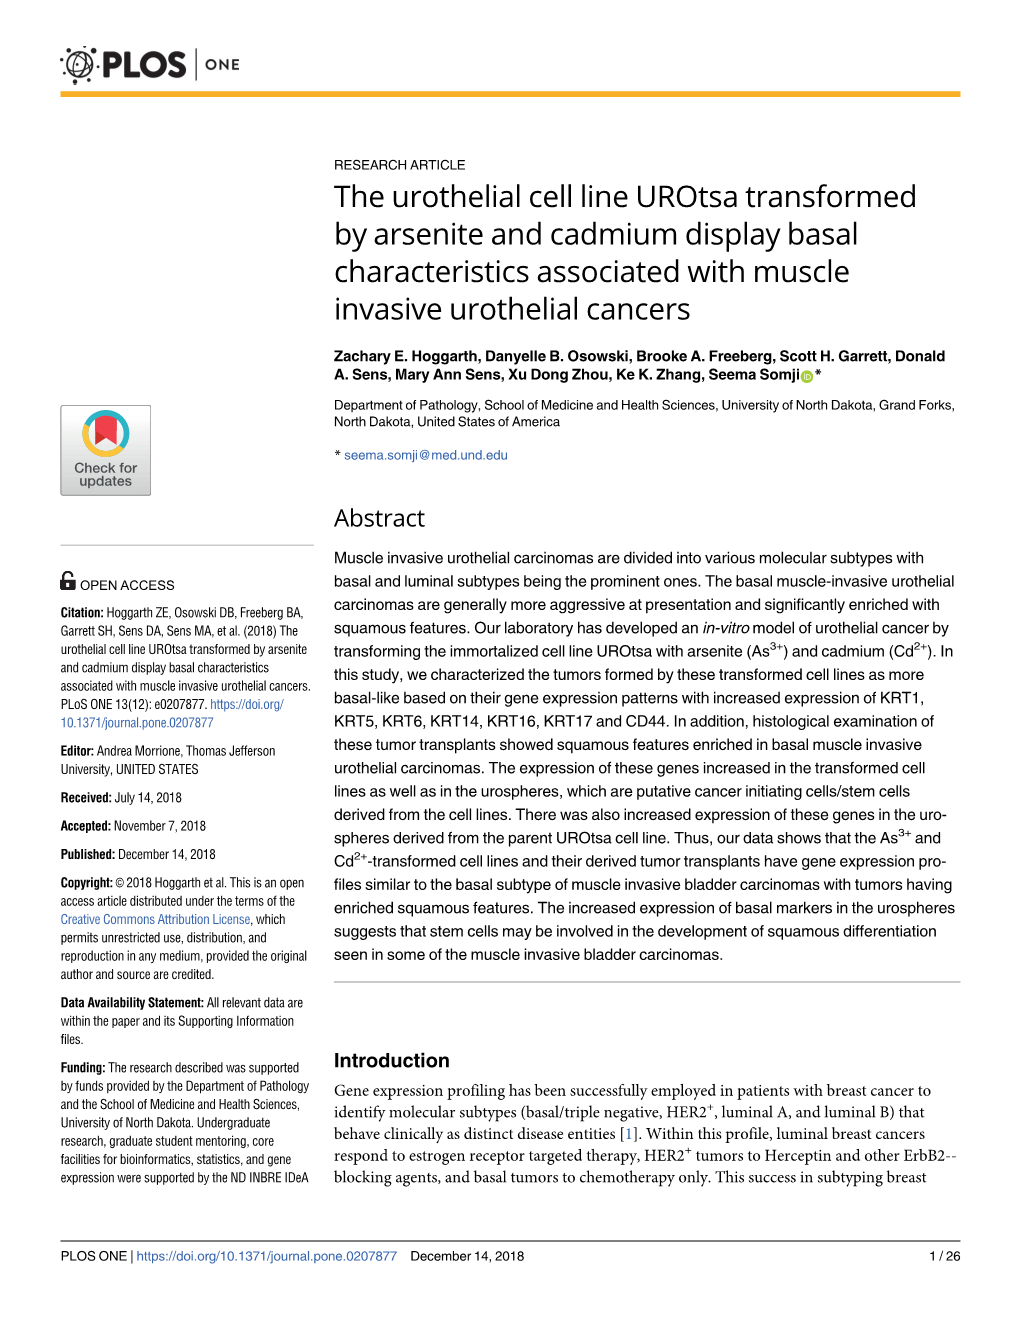 The Urothelial Cell Line Urotsa Transformed by Arsenite and Cadmium Display Basal Characteristics Associated with Muscle Invasive Urothelial Cancers